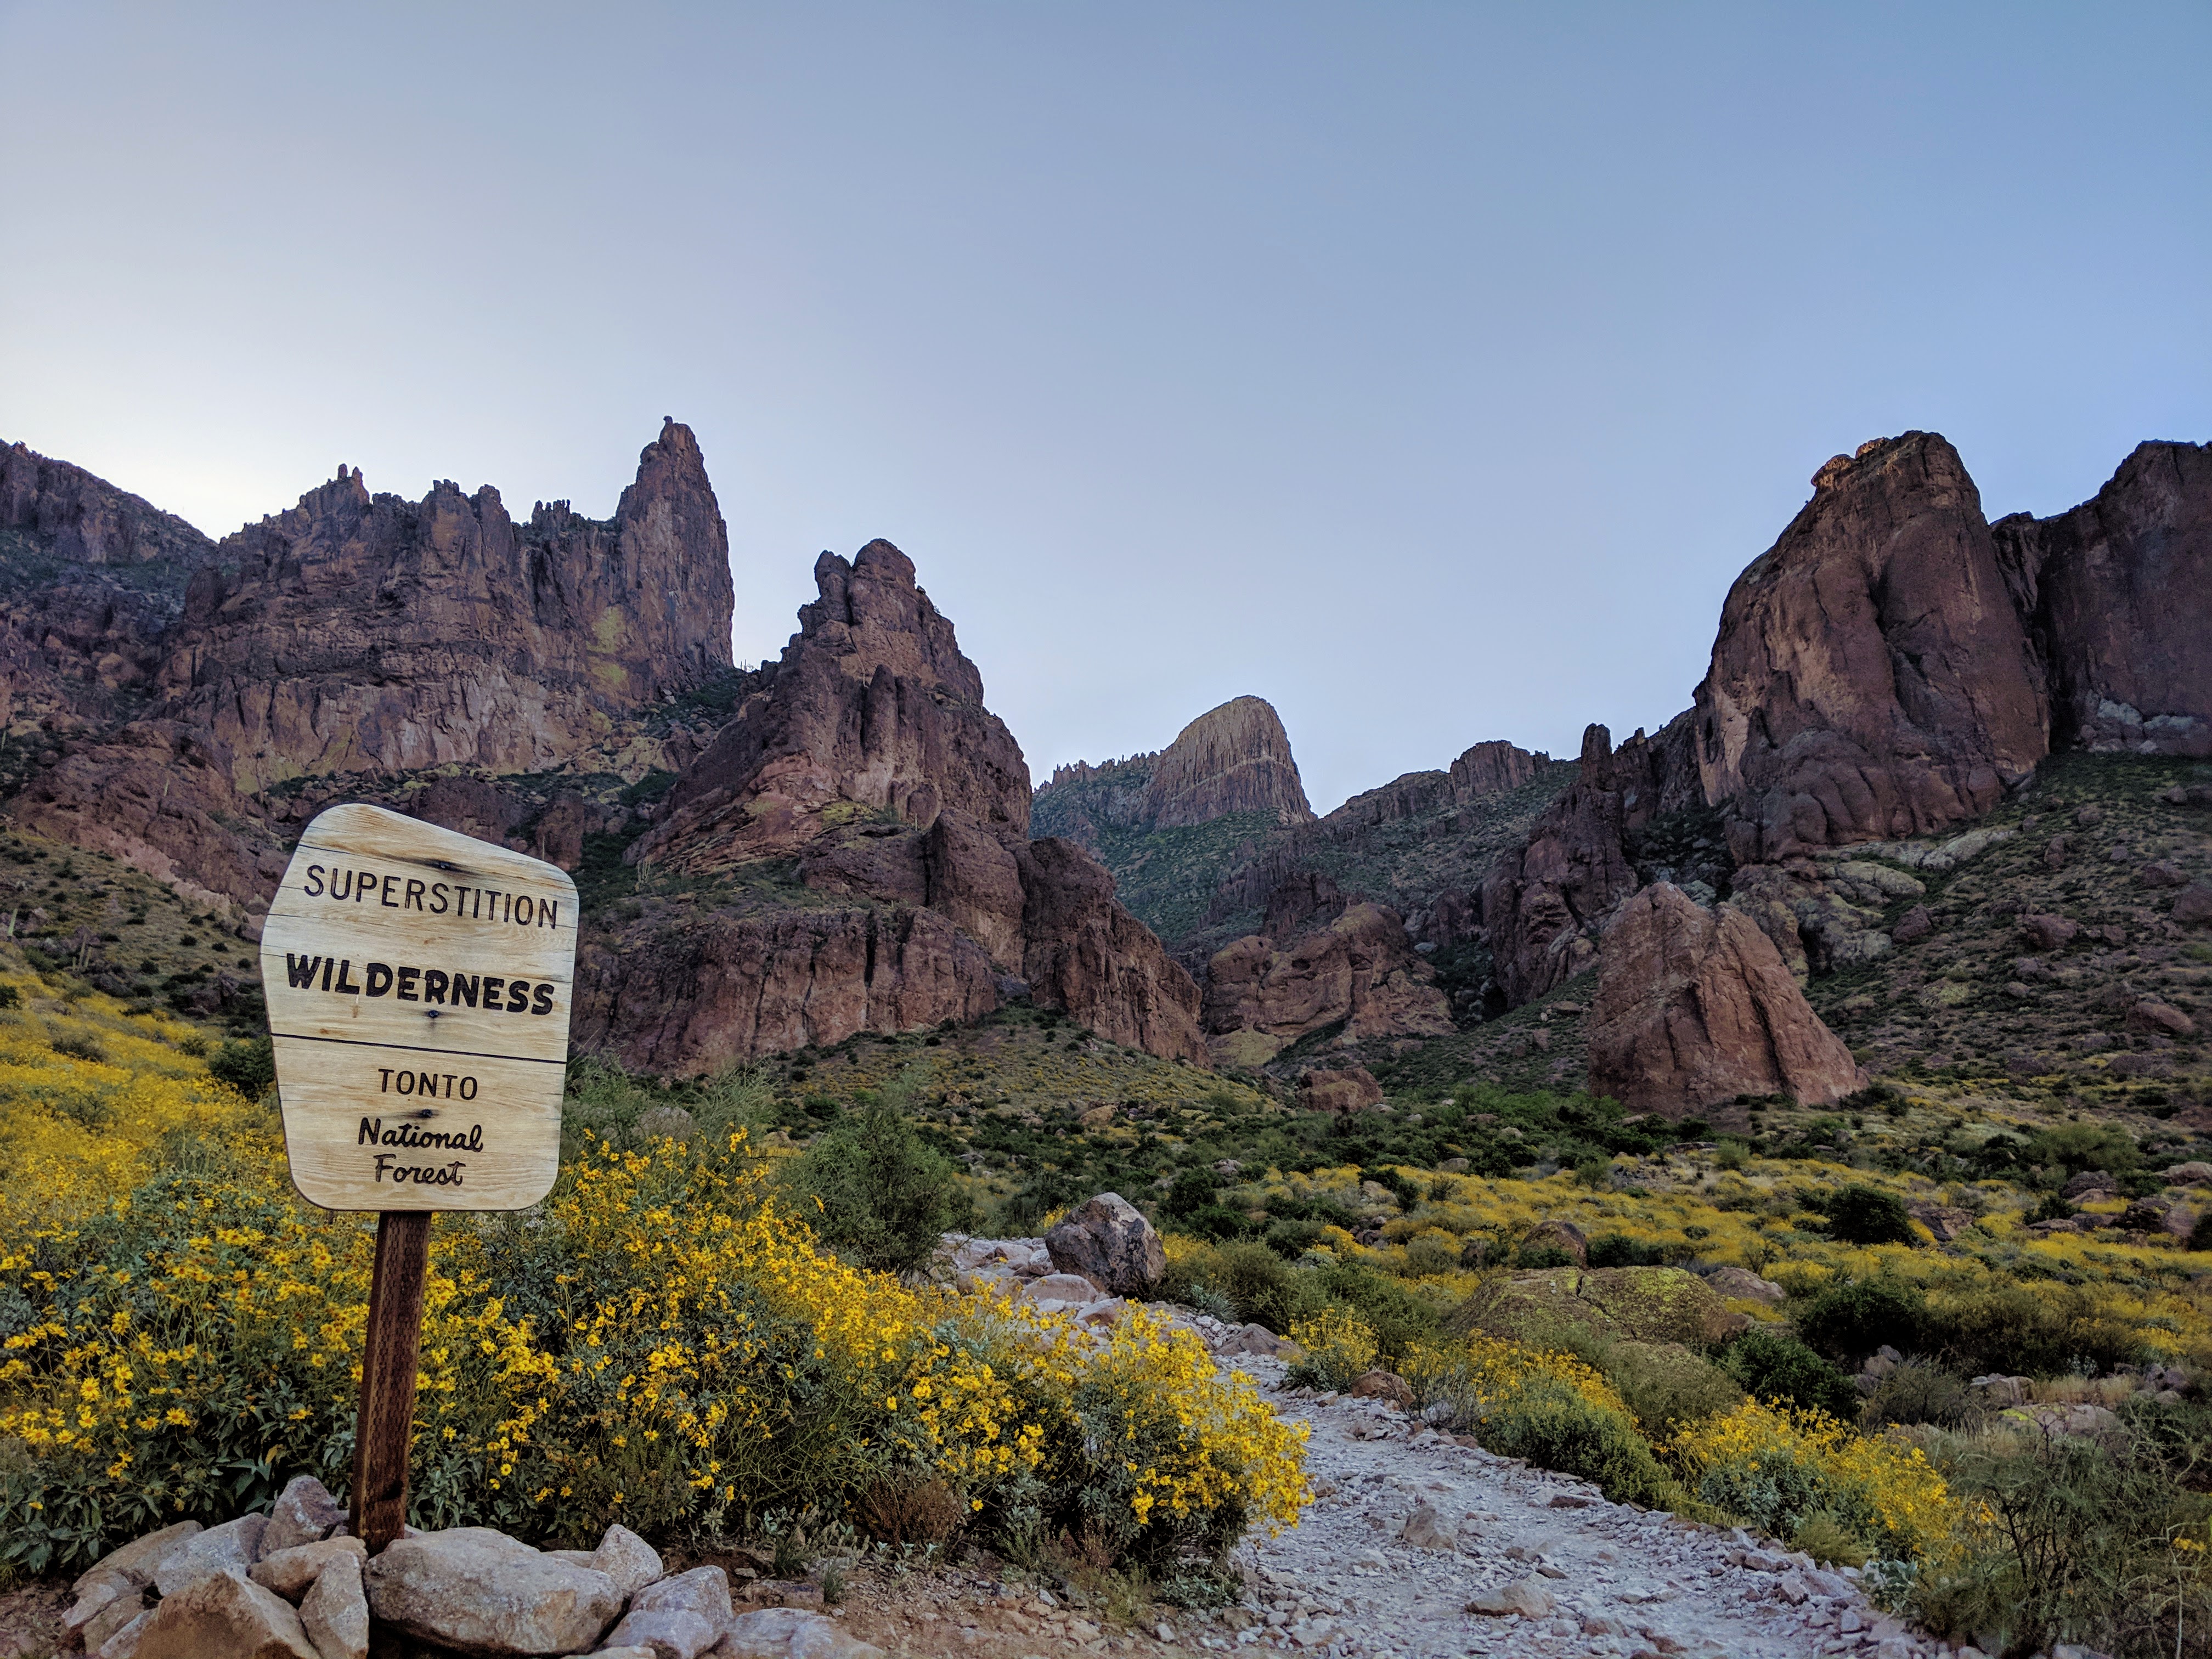 Photo by Gavin McGimpsey of the Flatiron in the Superstition Wilderness, along with the Forest Service sign marking the entrance to the wilderness area.